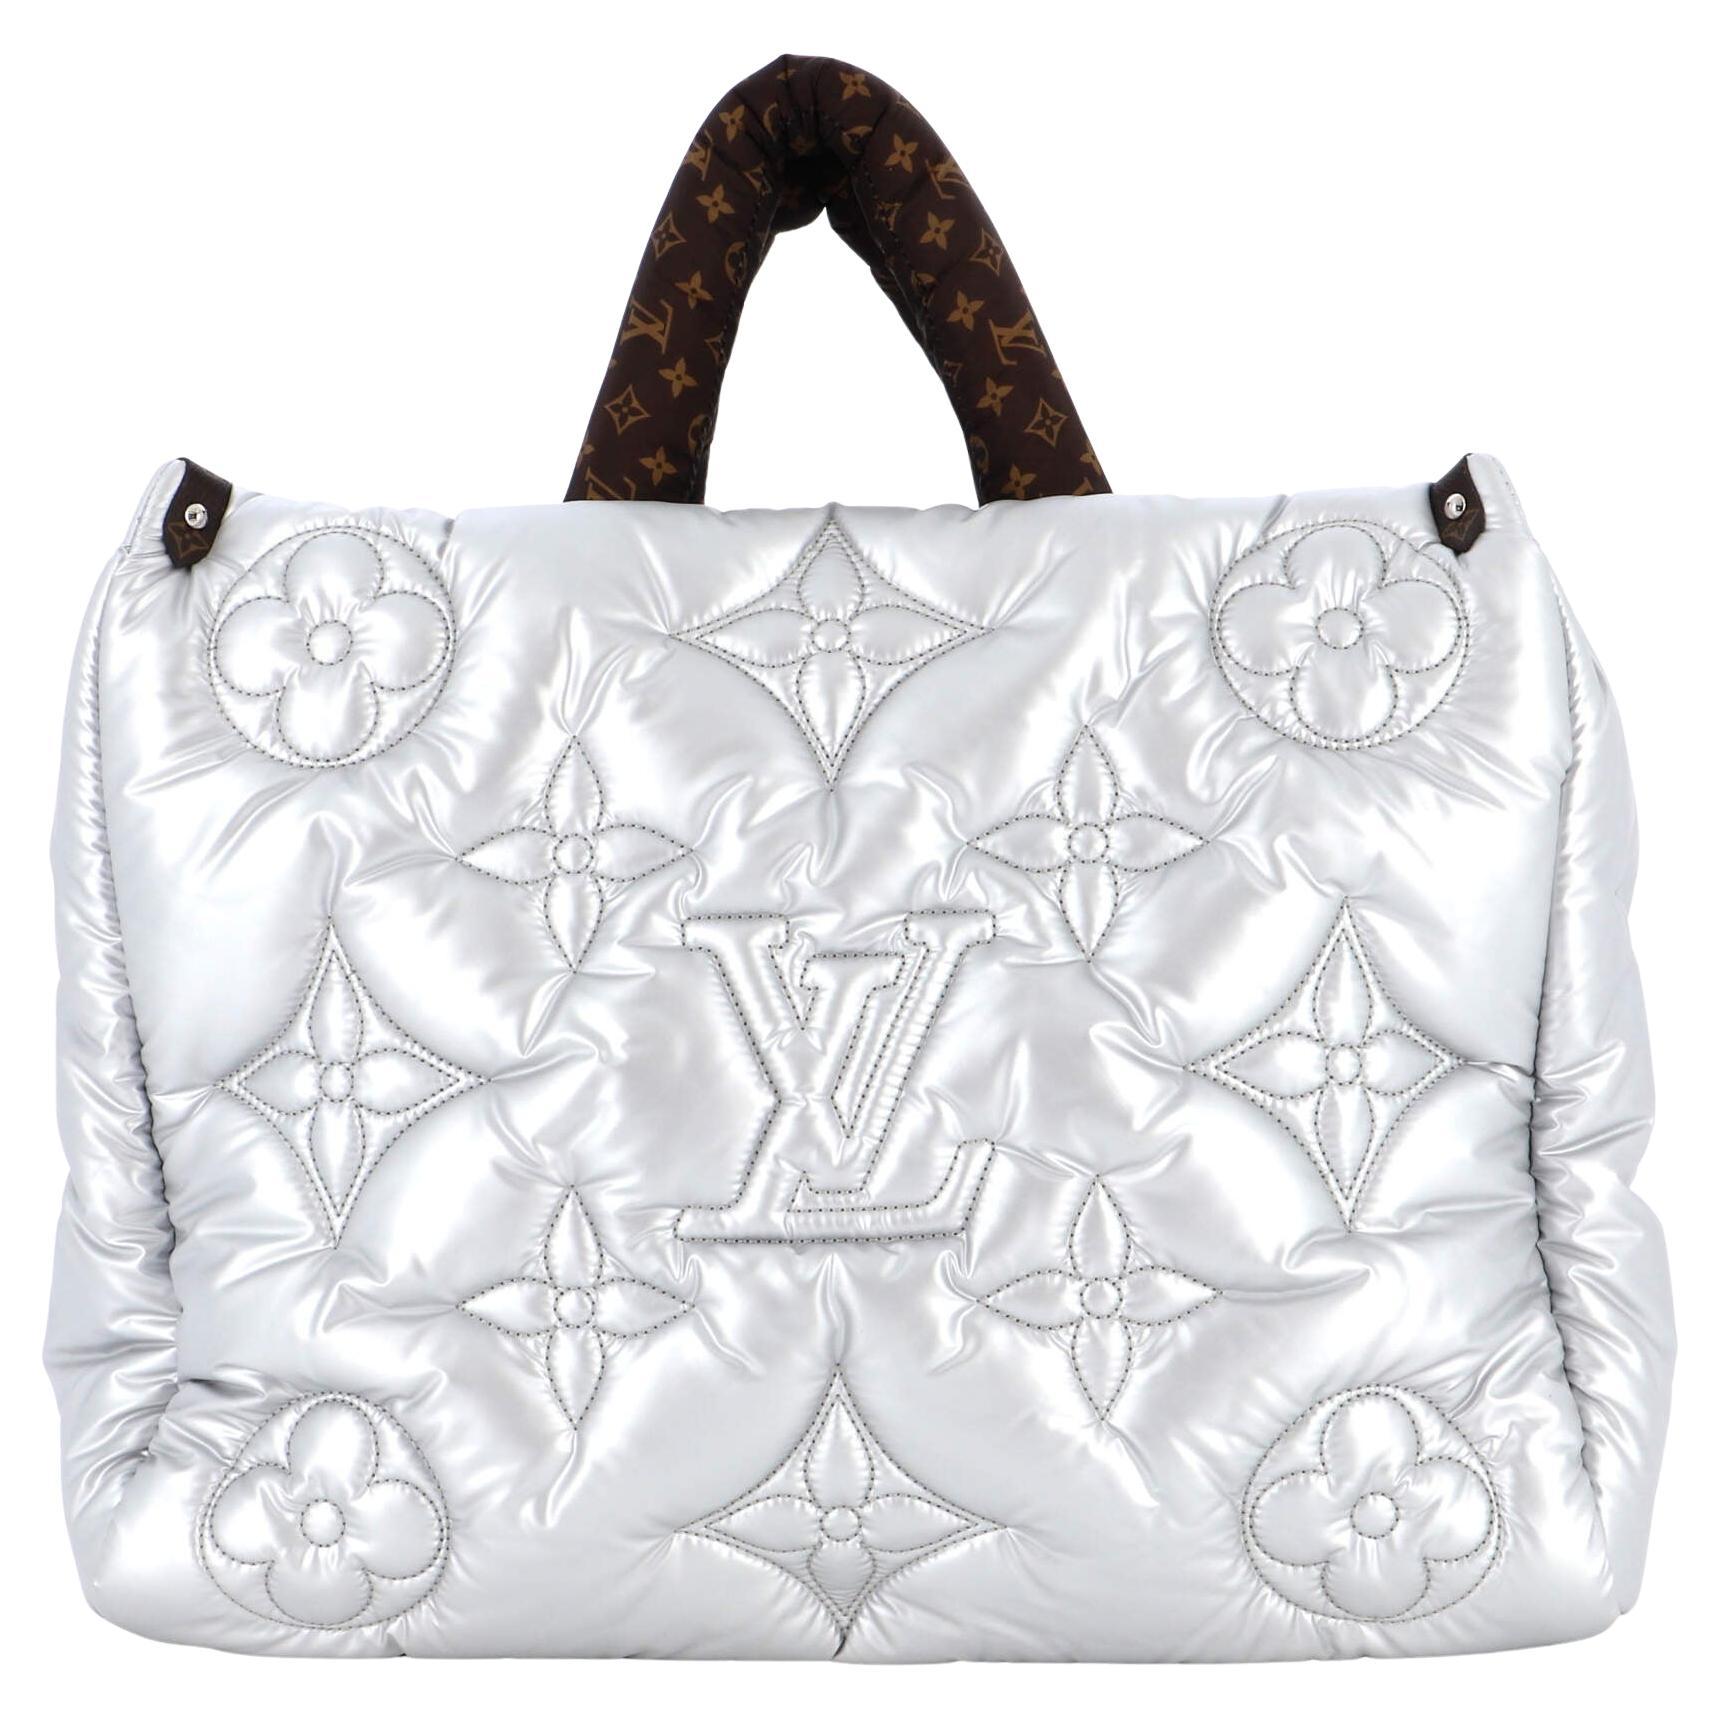 Louis Vuitton OnTheGo GM Tote Bag Econyl with Mini Monogram and